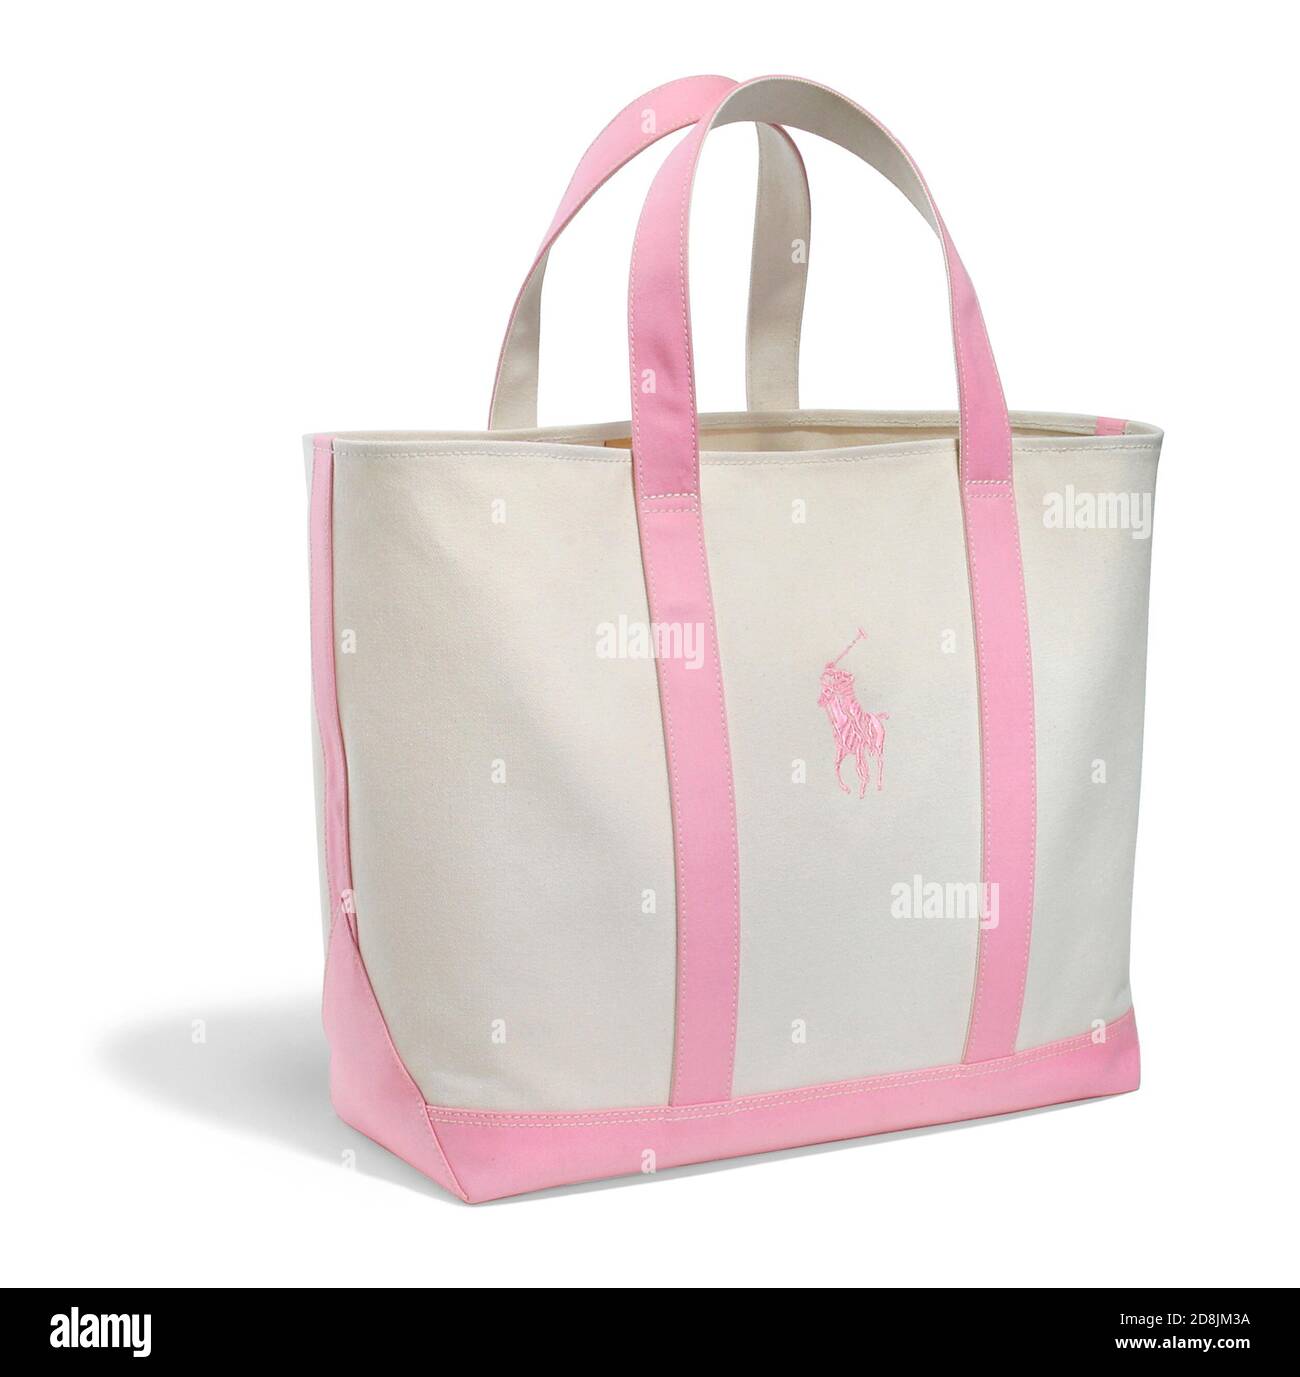 Ralph Lauren Polo pink and white canvas tote bag photographed on a white  background Stock Photo - Alamy